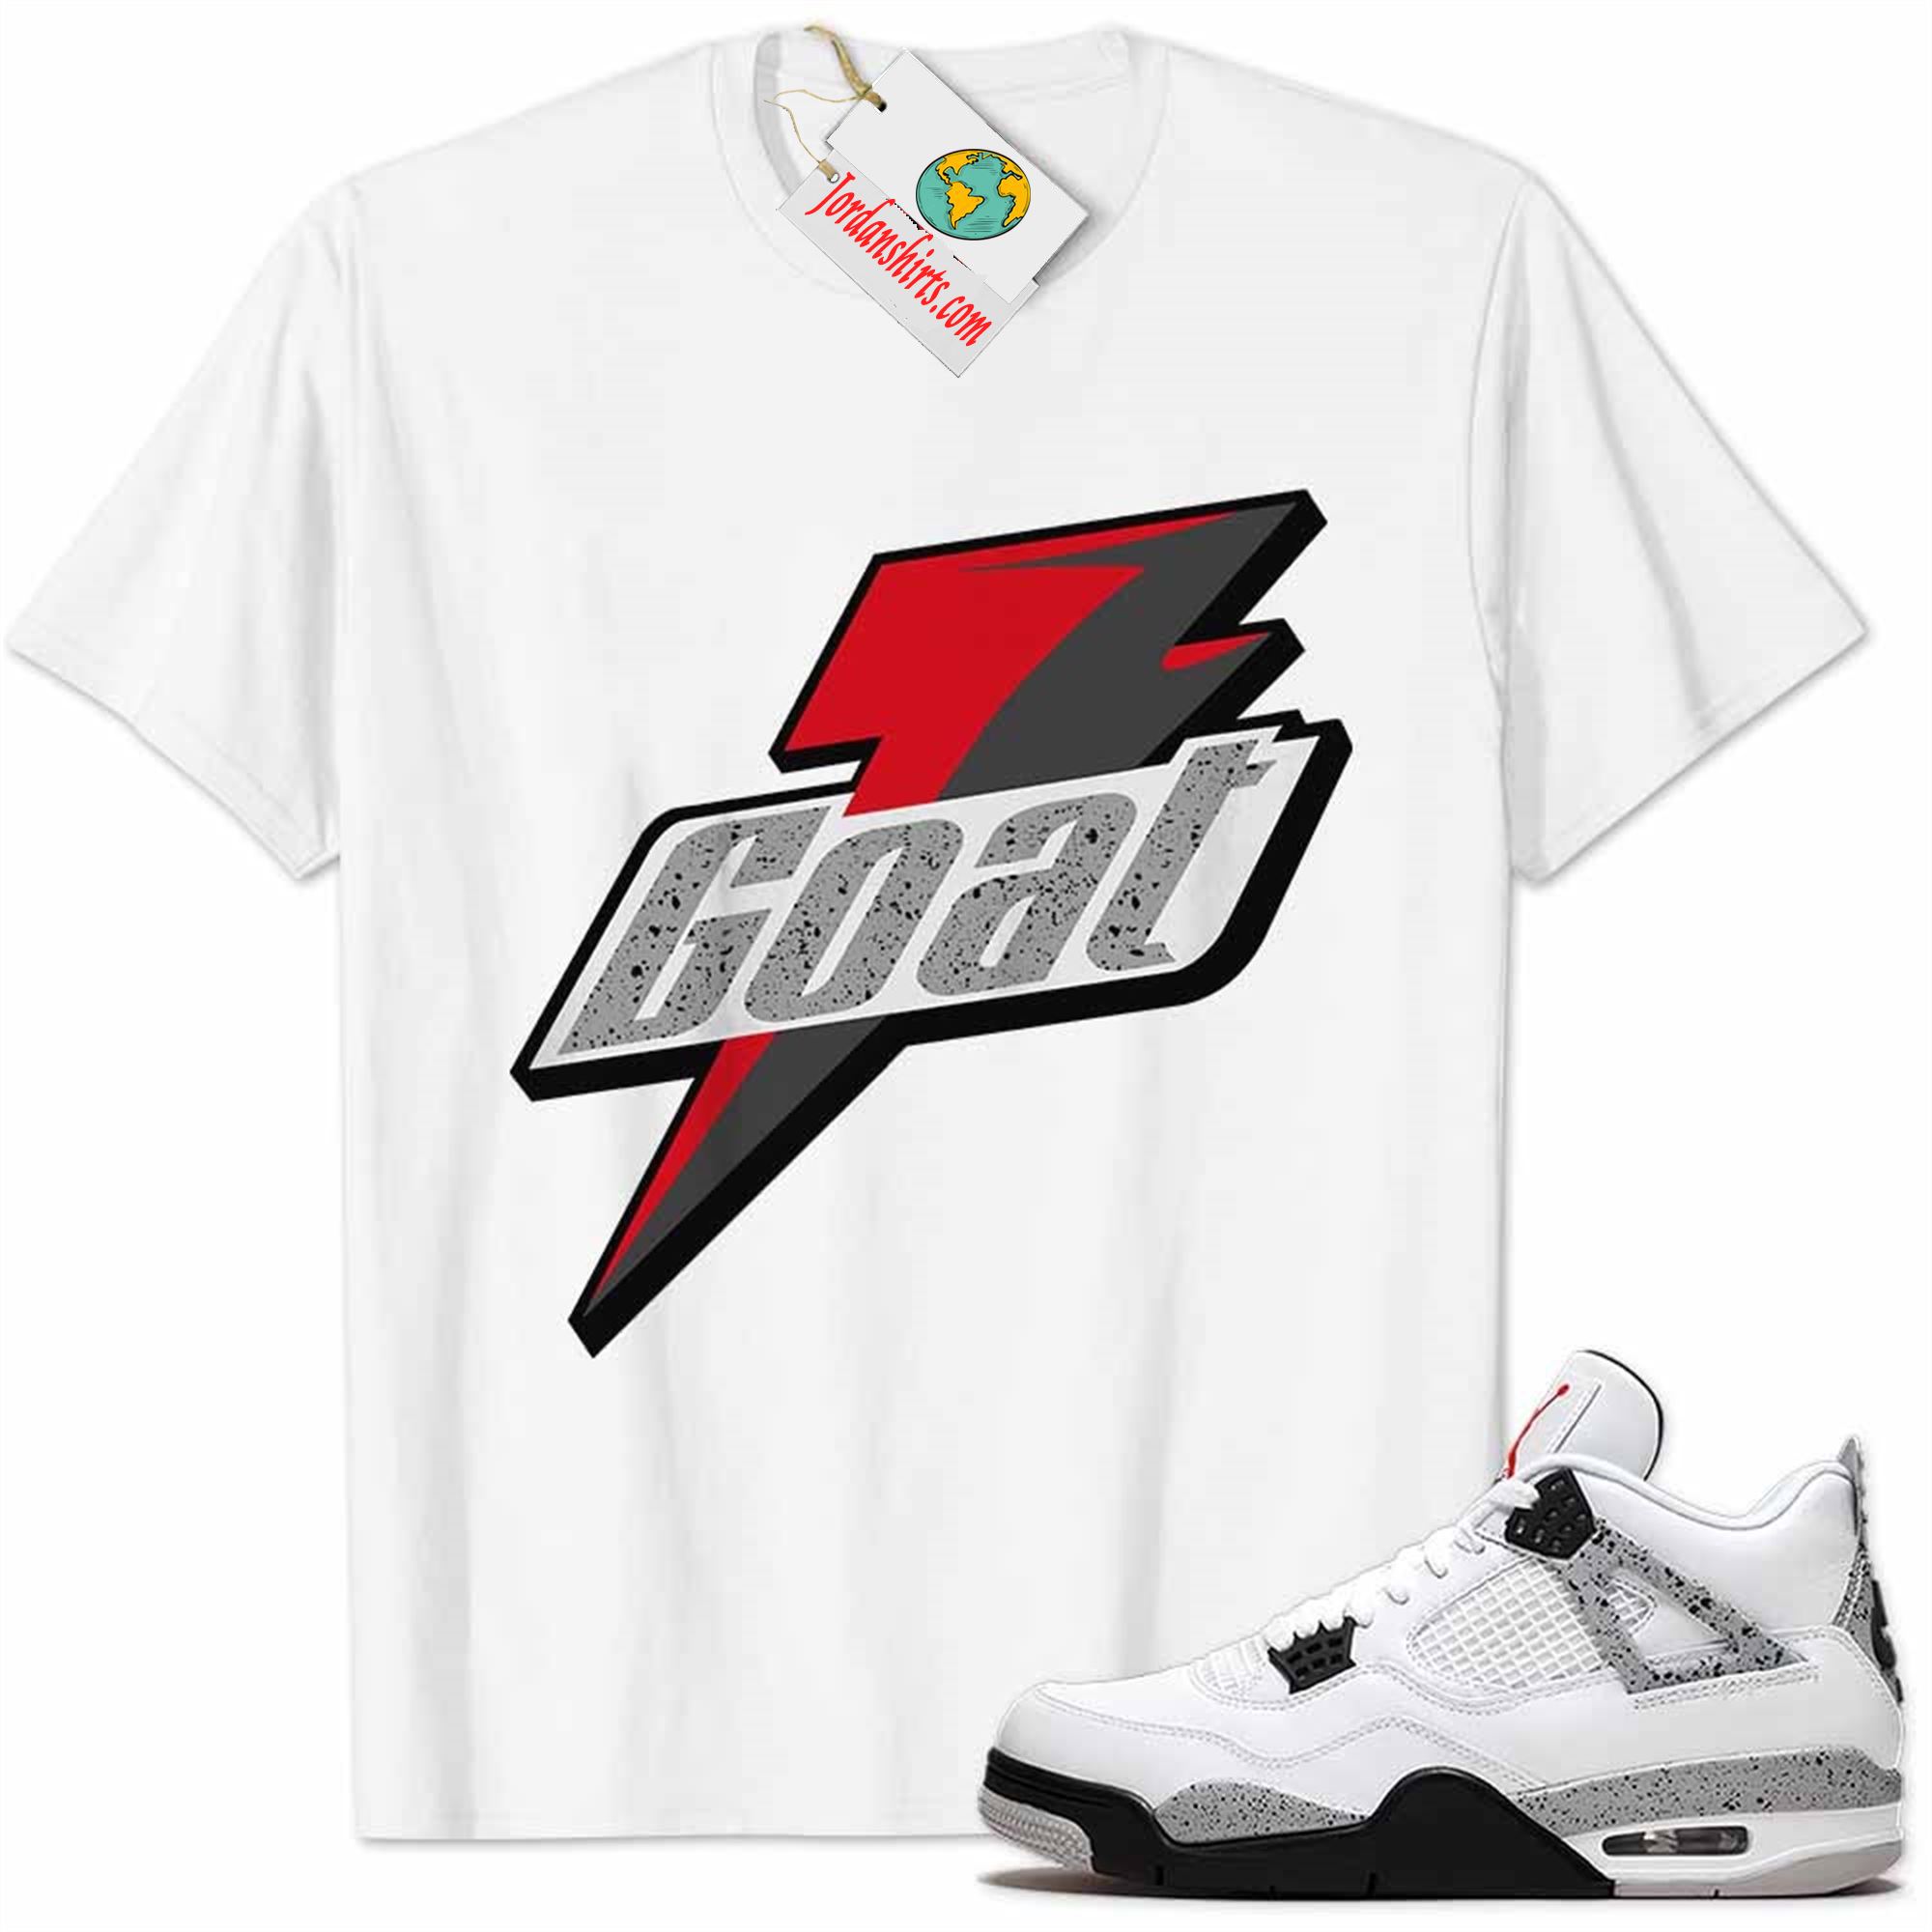 Jordan 4 Shirt, Cement 4s Shirt Goat Greatest Of All Time White Full Size Up To 5xl